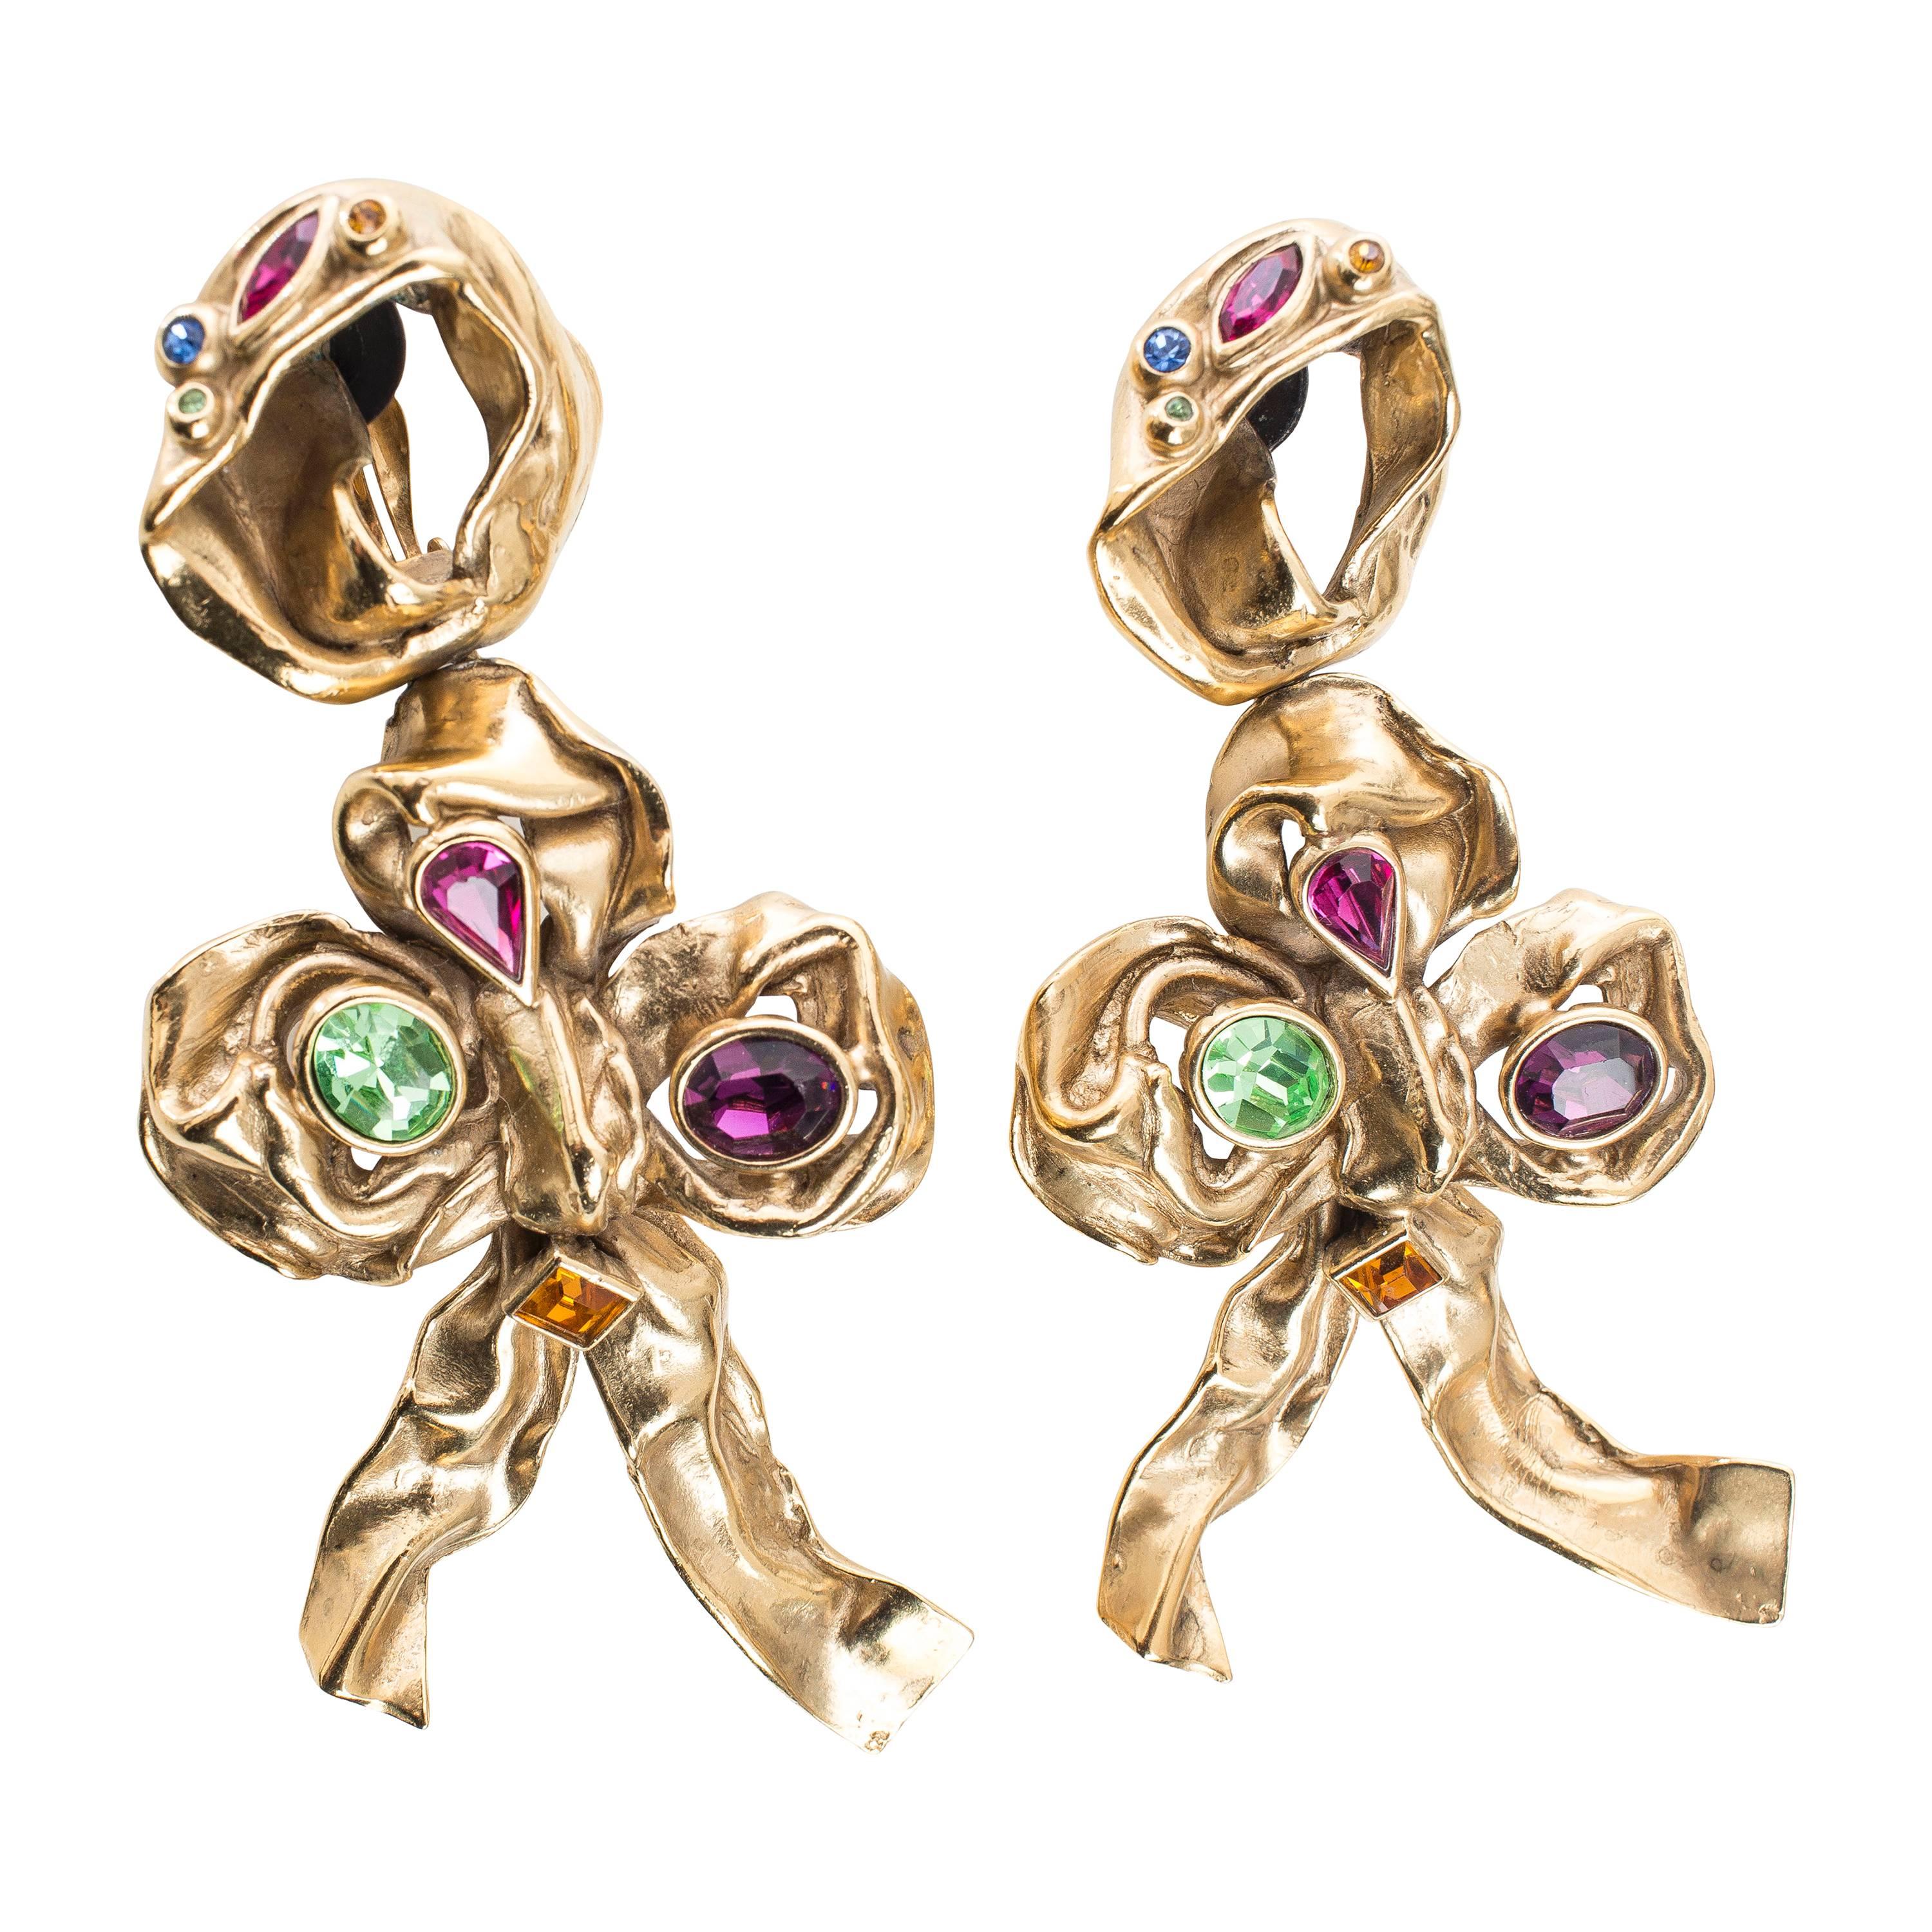 Yves Saint Laurent Massive Gilt Leaf Earrings With Faceted Stones, Circa 1980's For Sale